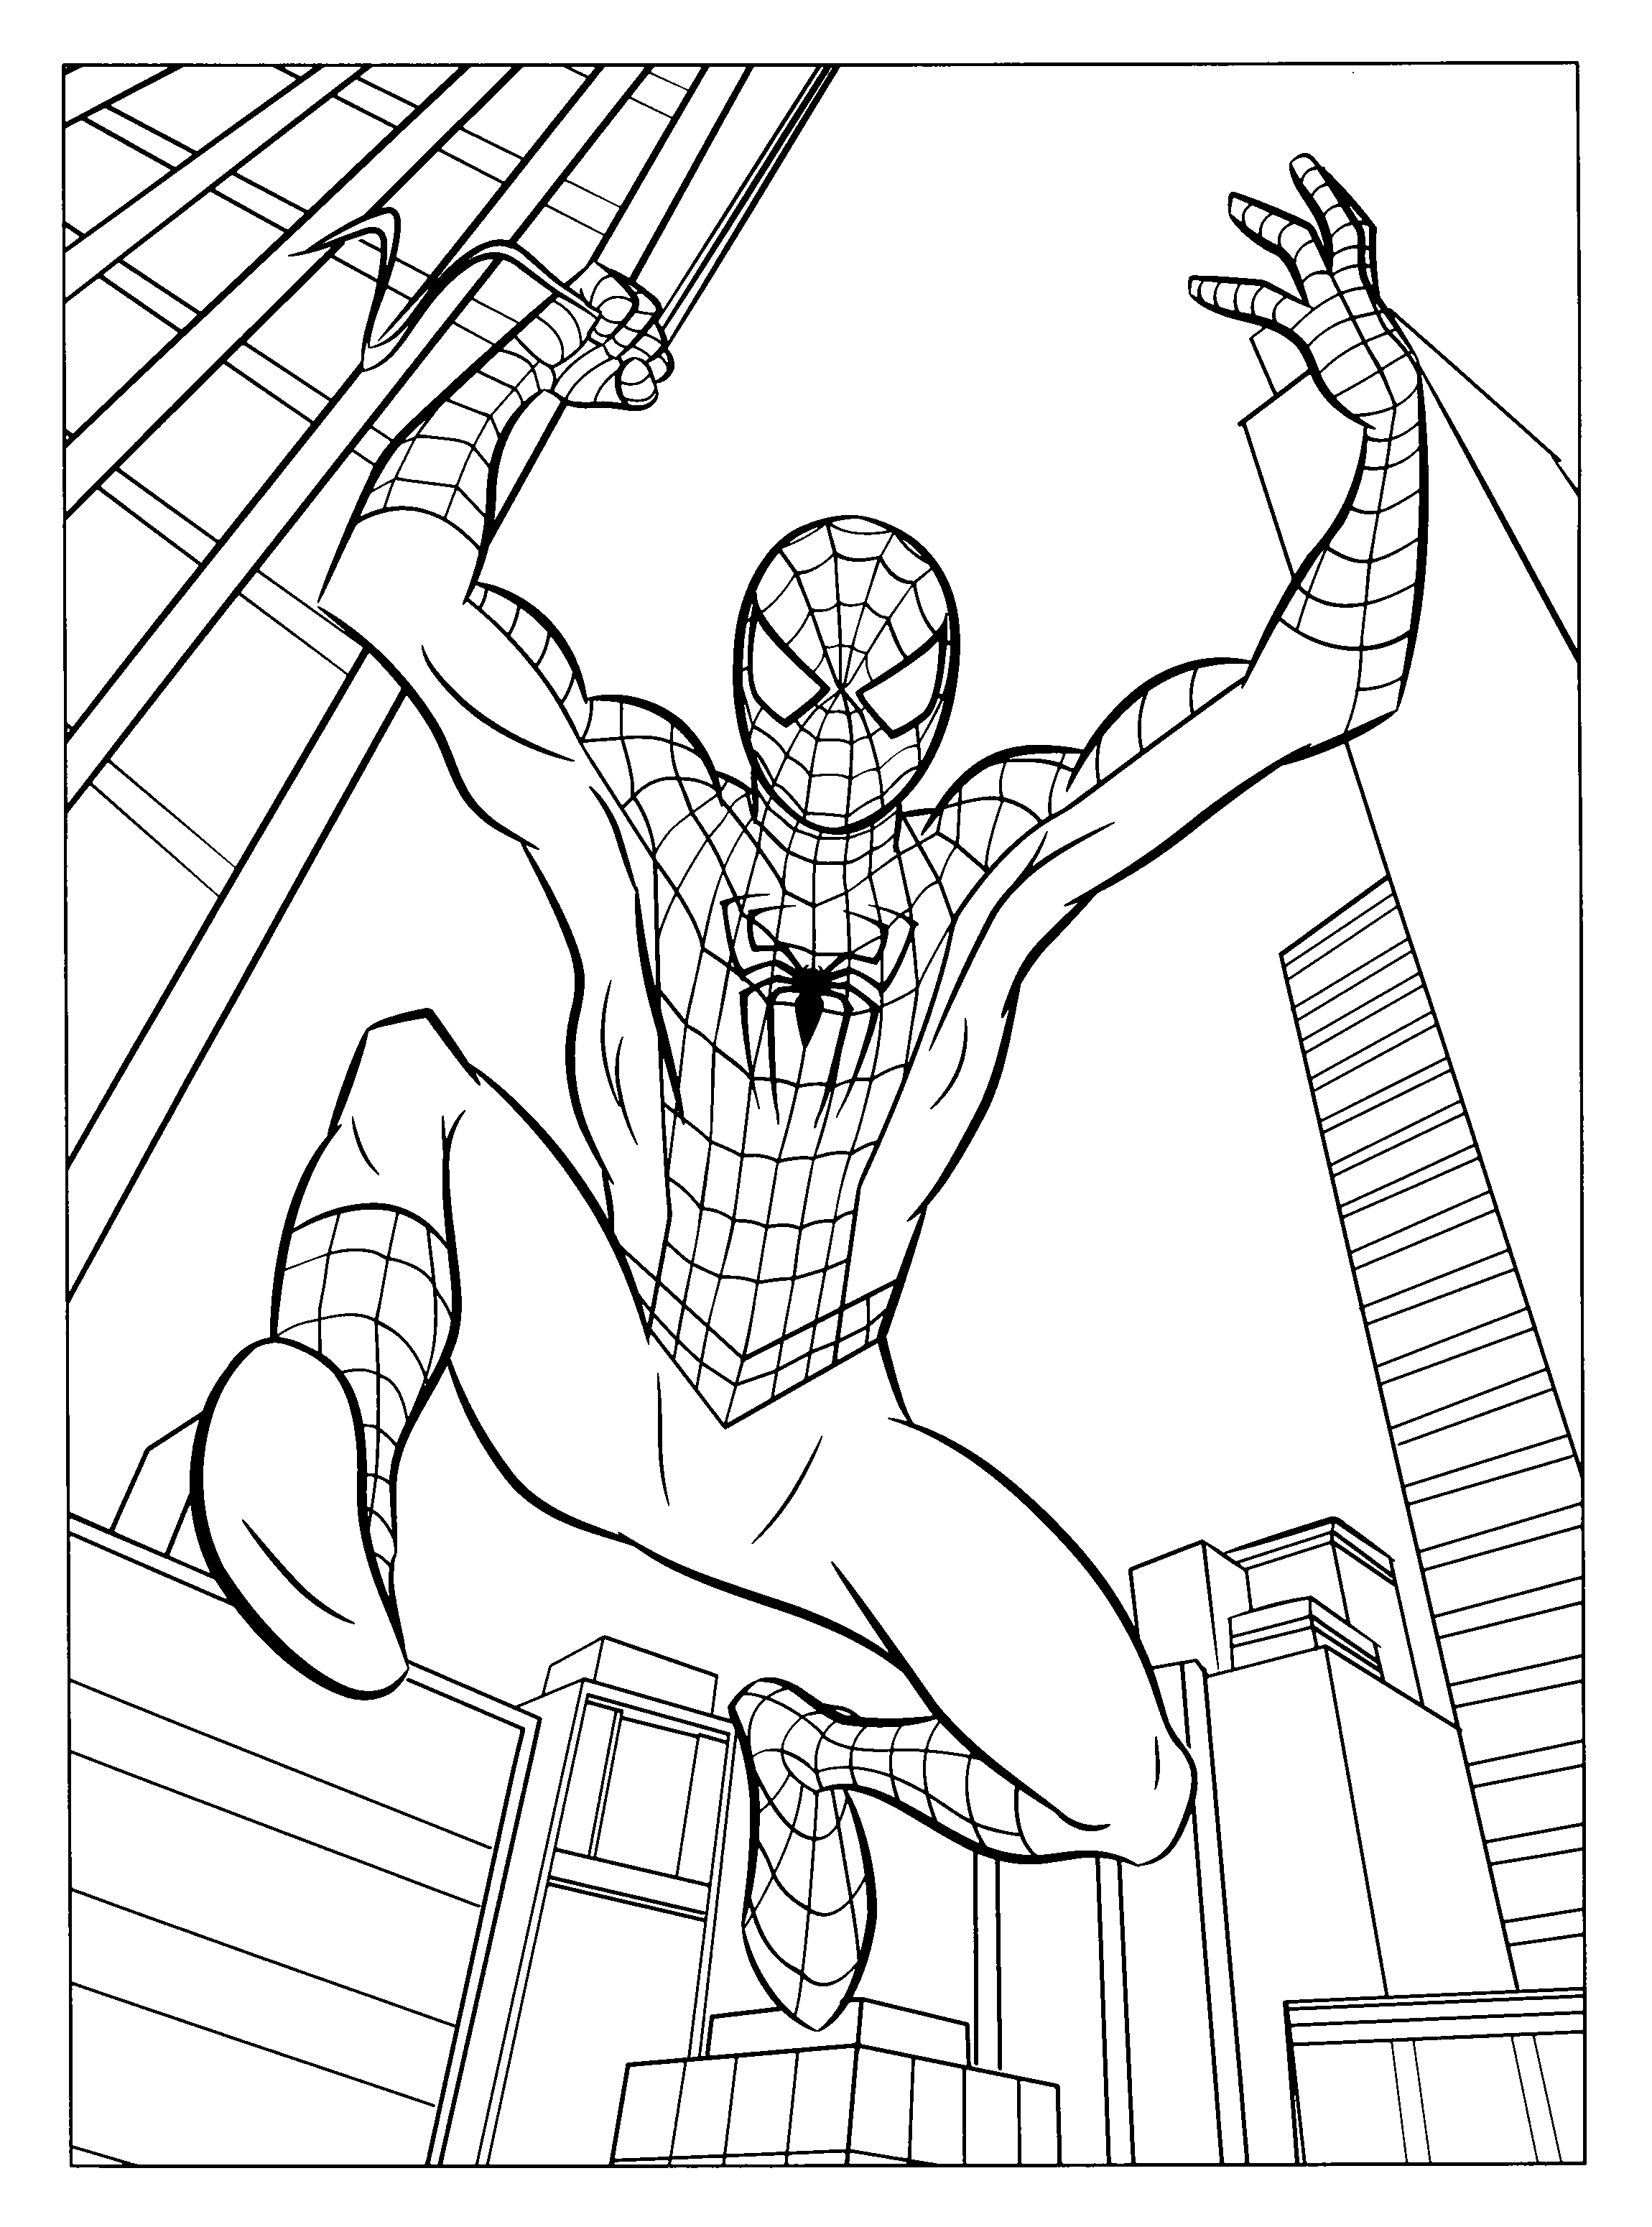 Spider Man Coloring Pages for Children